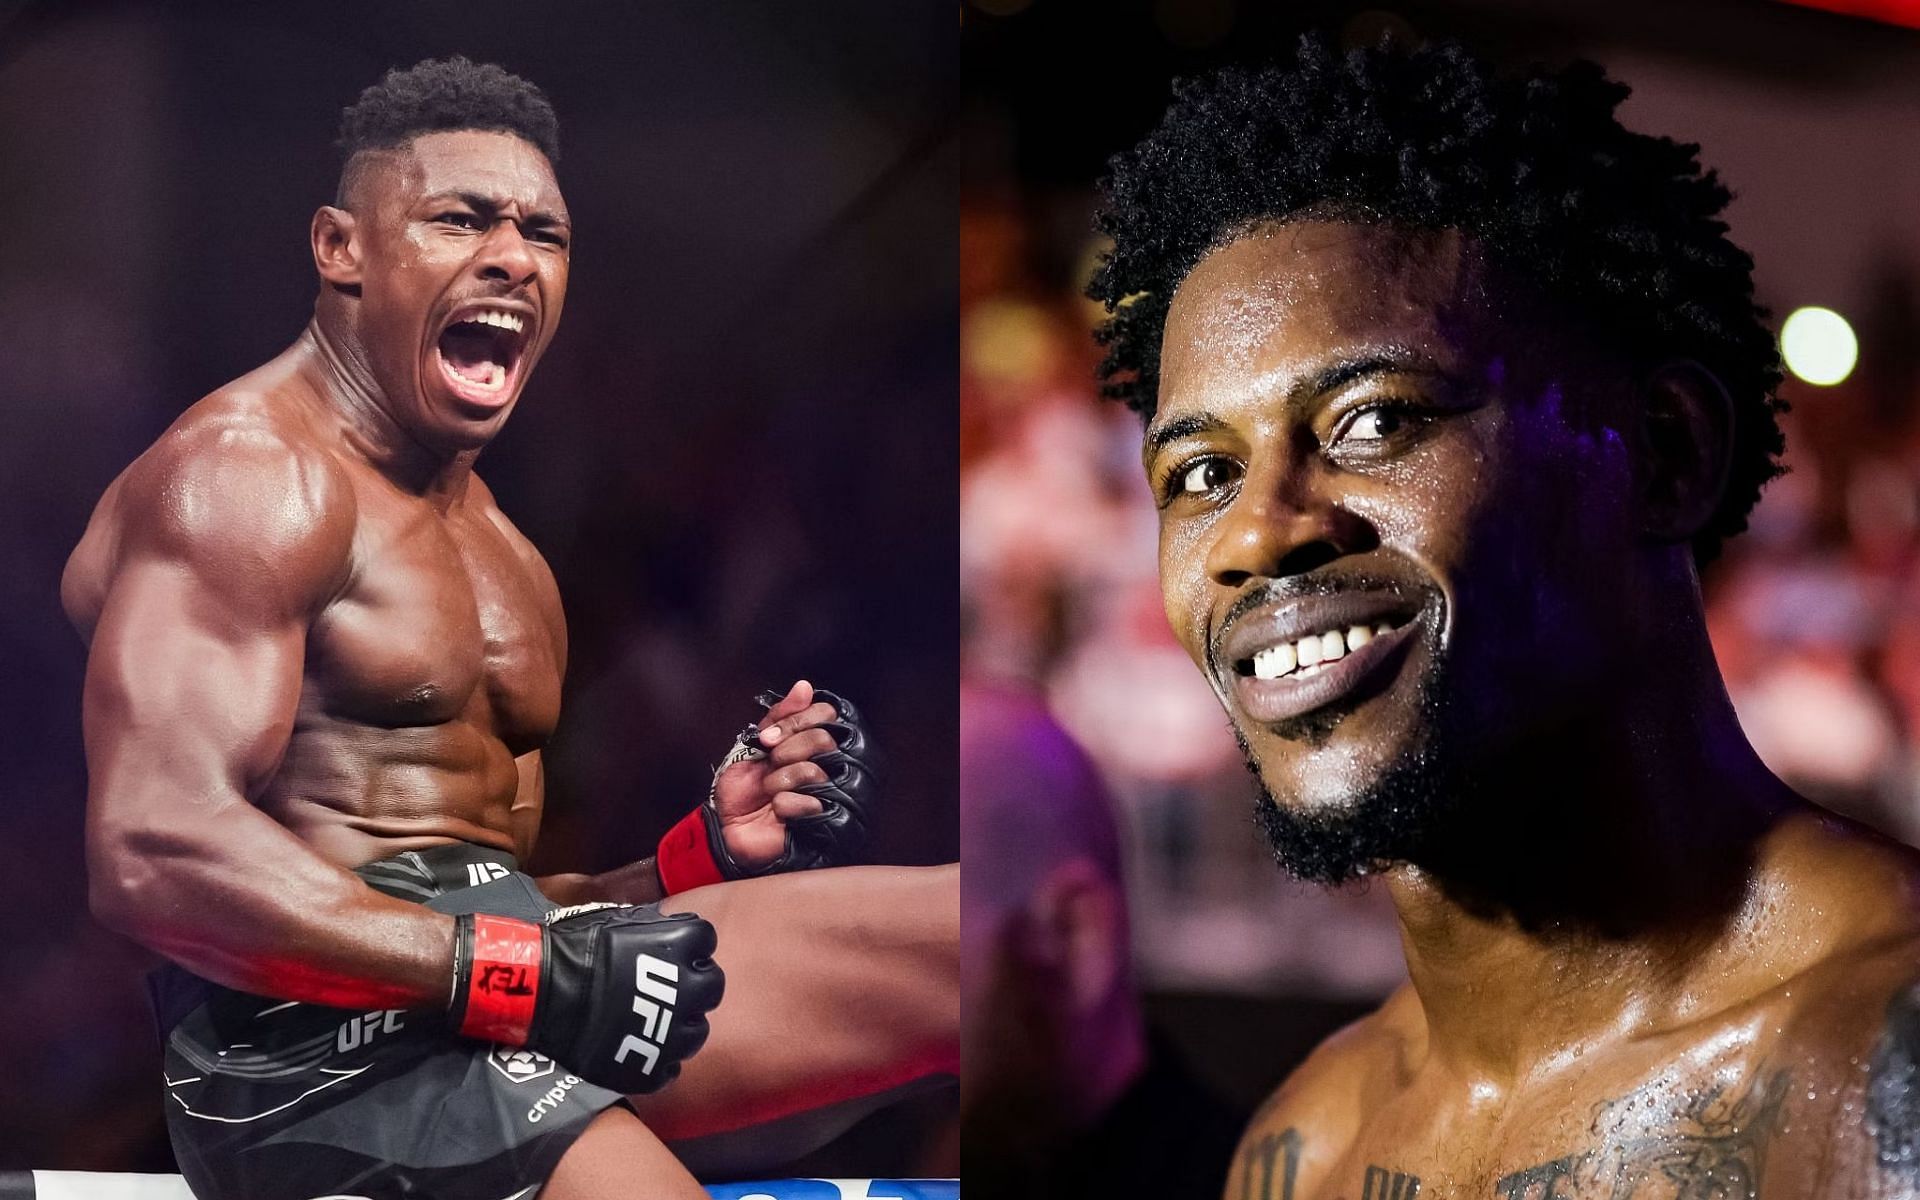 Joaquin Buckley (left) shuts down rematch with Kevin Holland (right) following recent TKO win at UFC Atlantic City [Images Courtesy: @GettyImages]